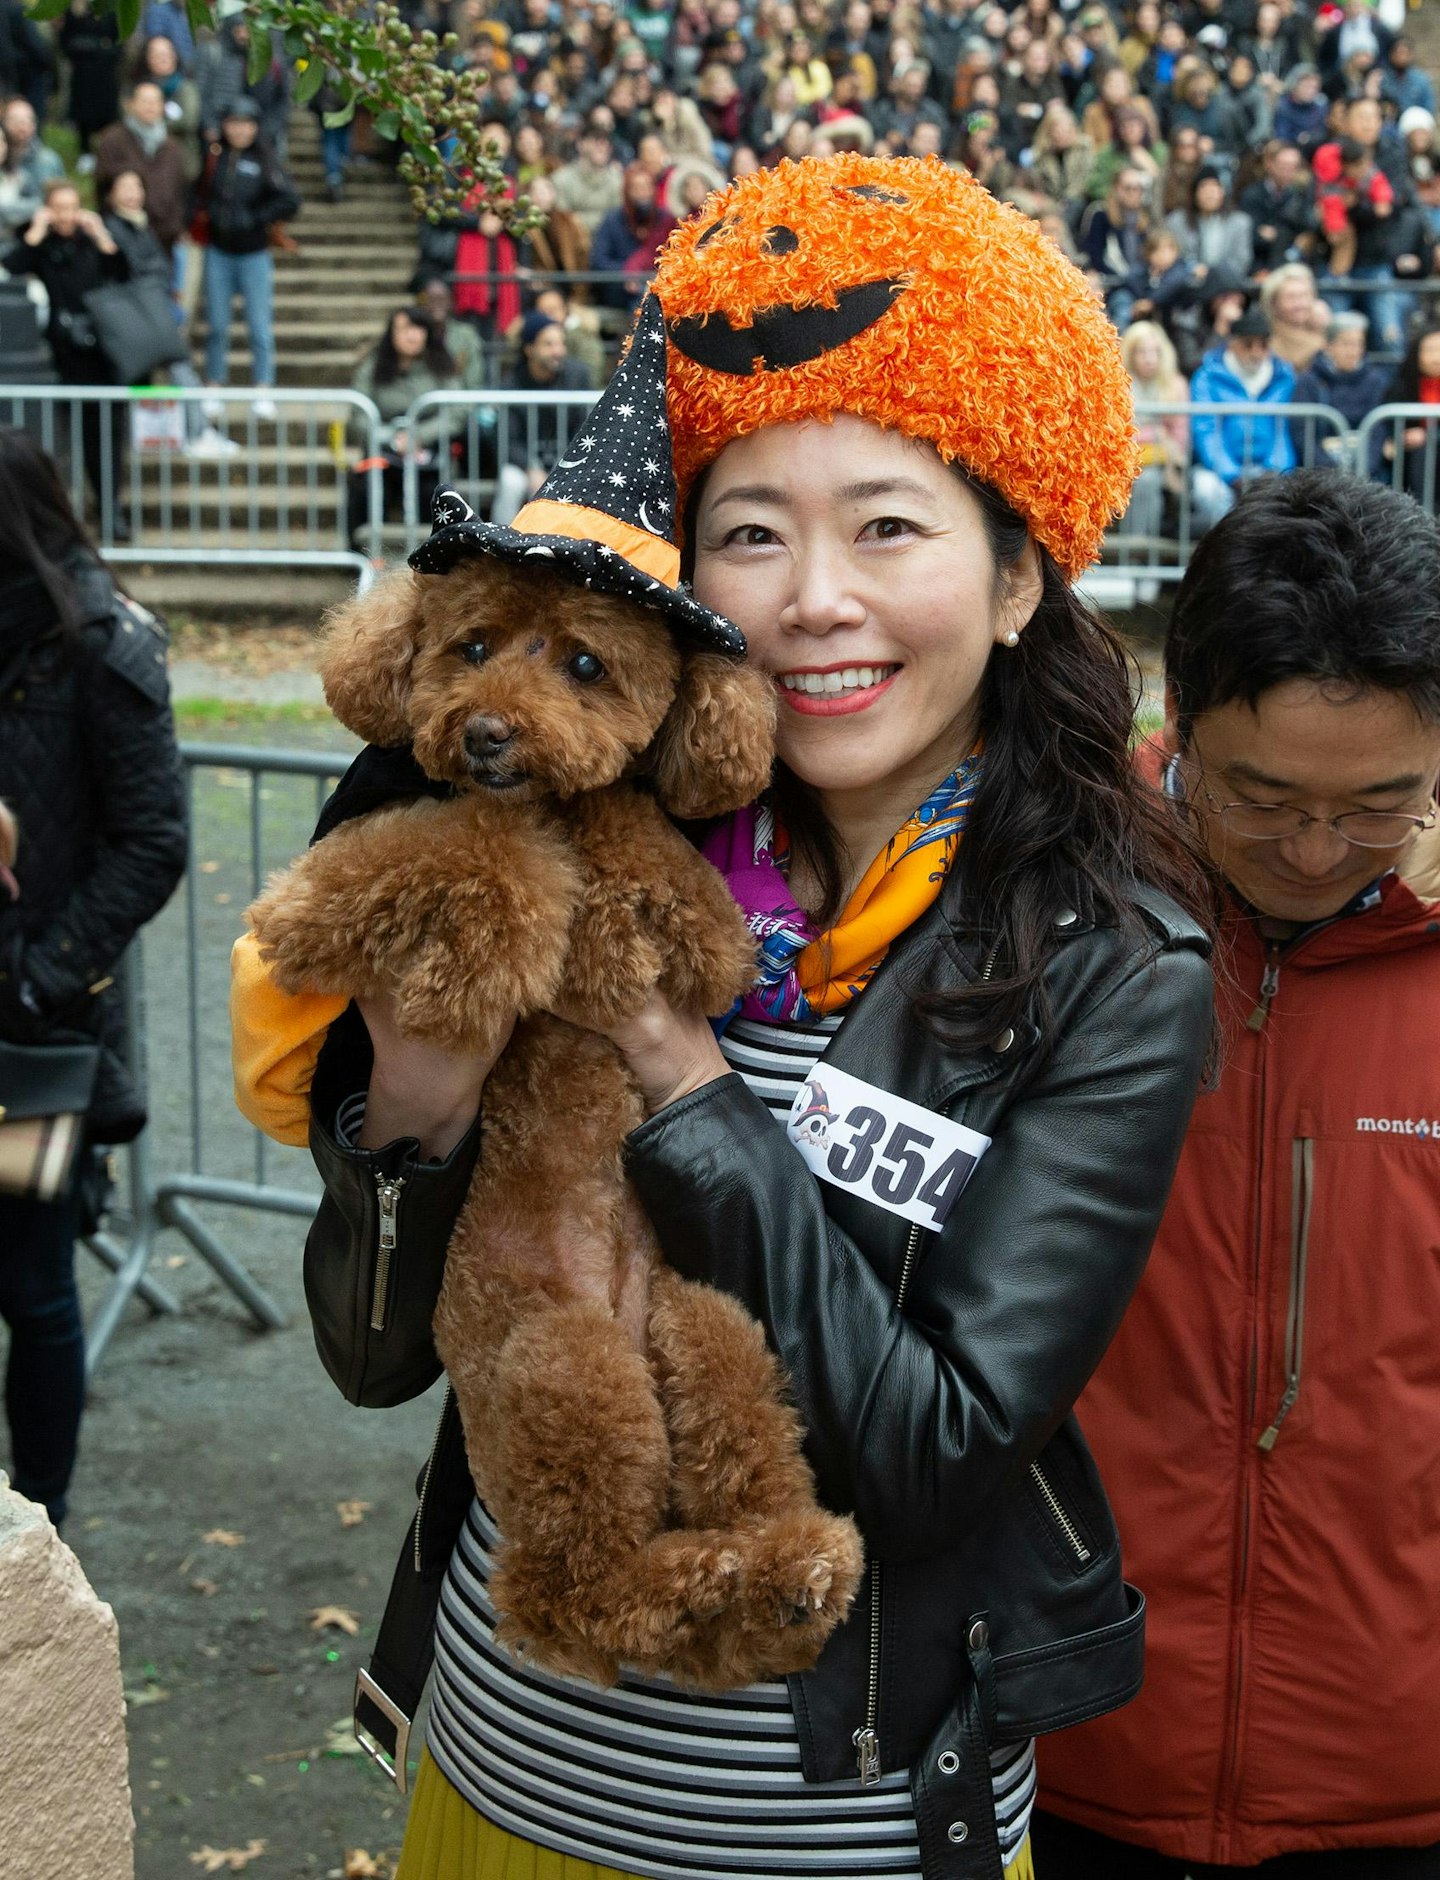 Dogs at Halloween - Grazia (Stacked)